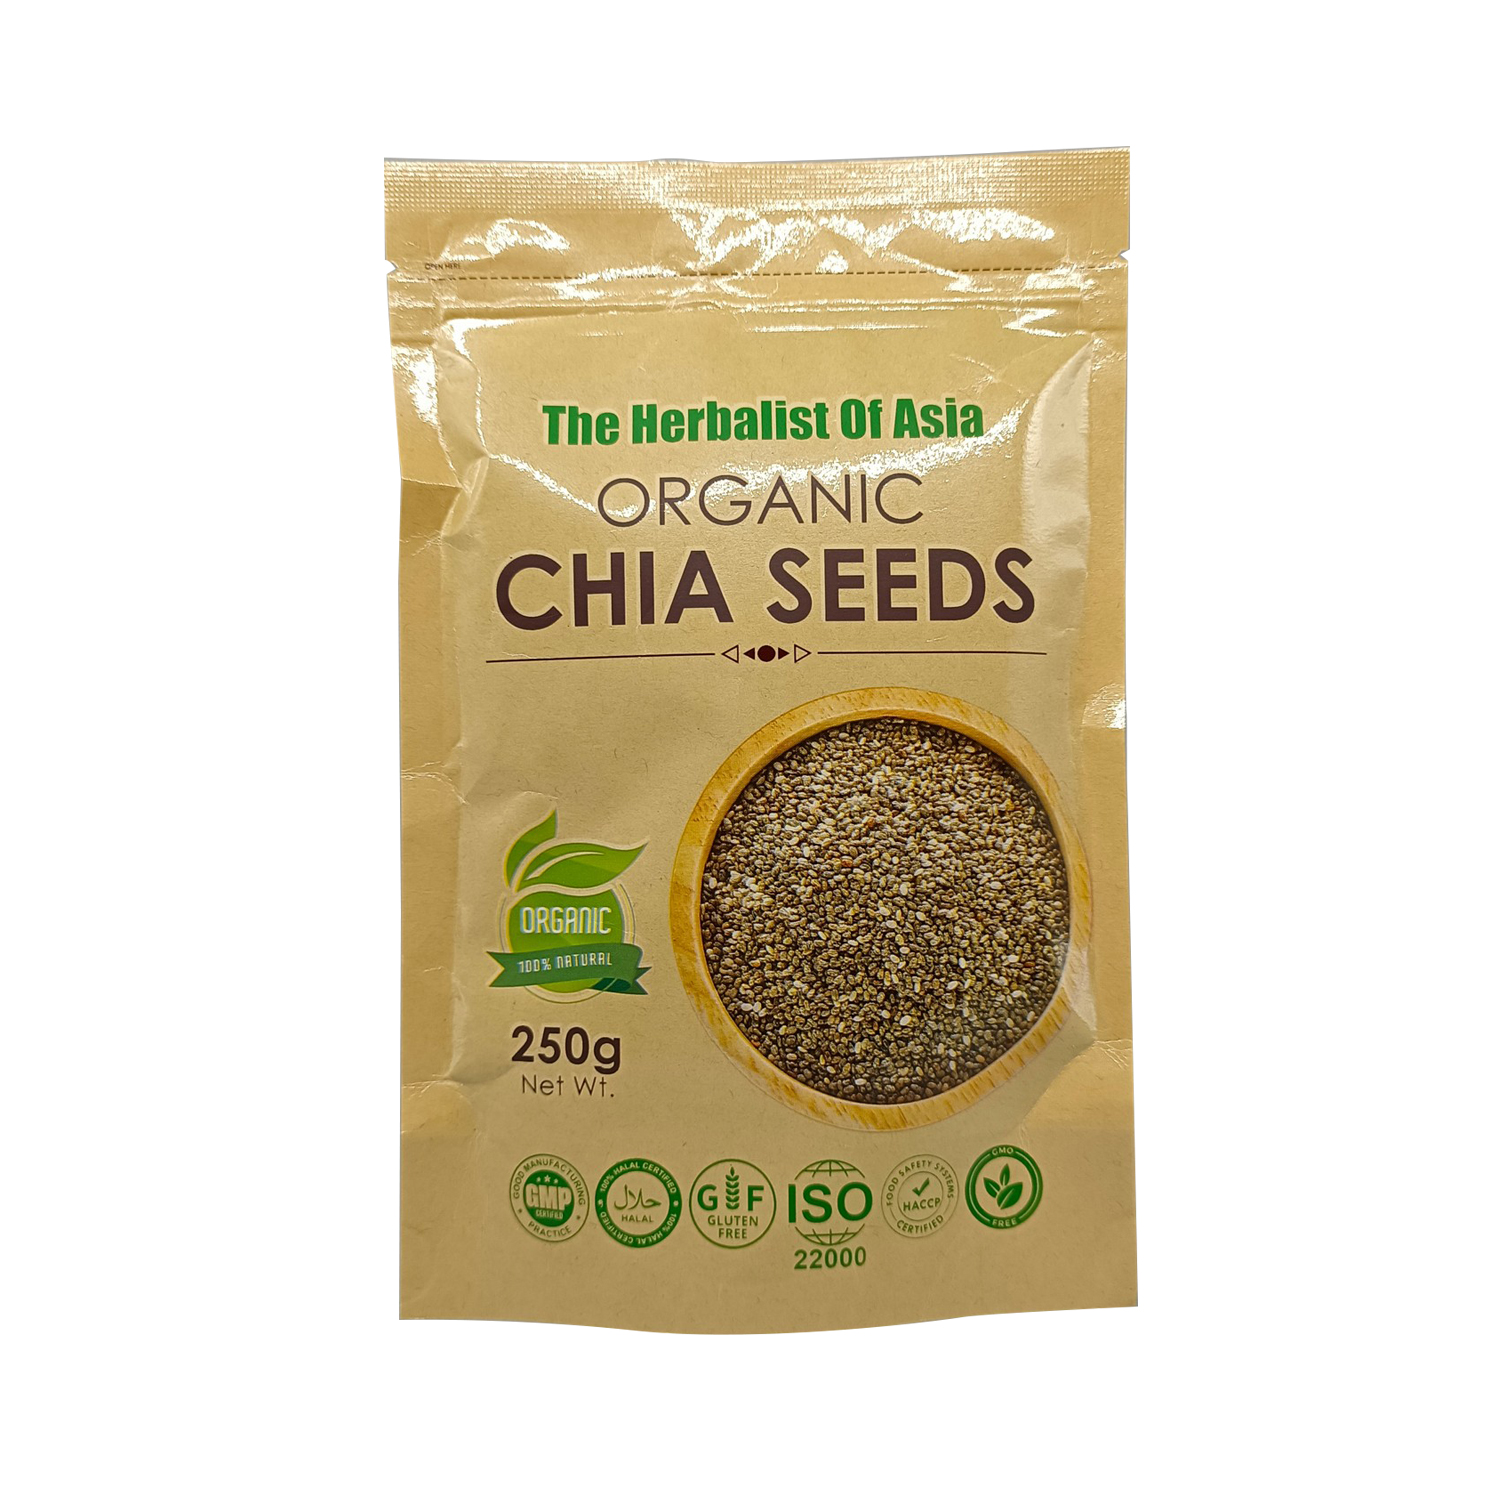 The Herbalist of Asia Organic Chia Seeds